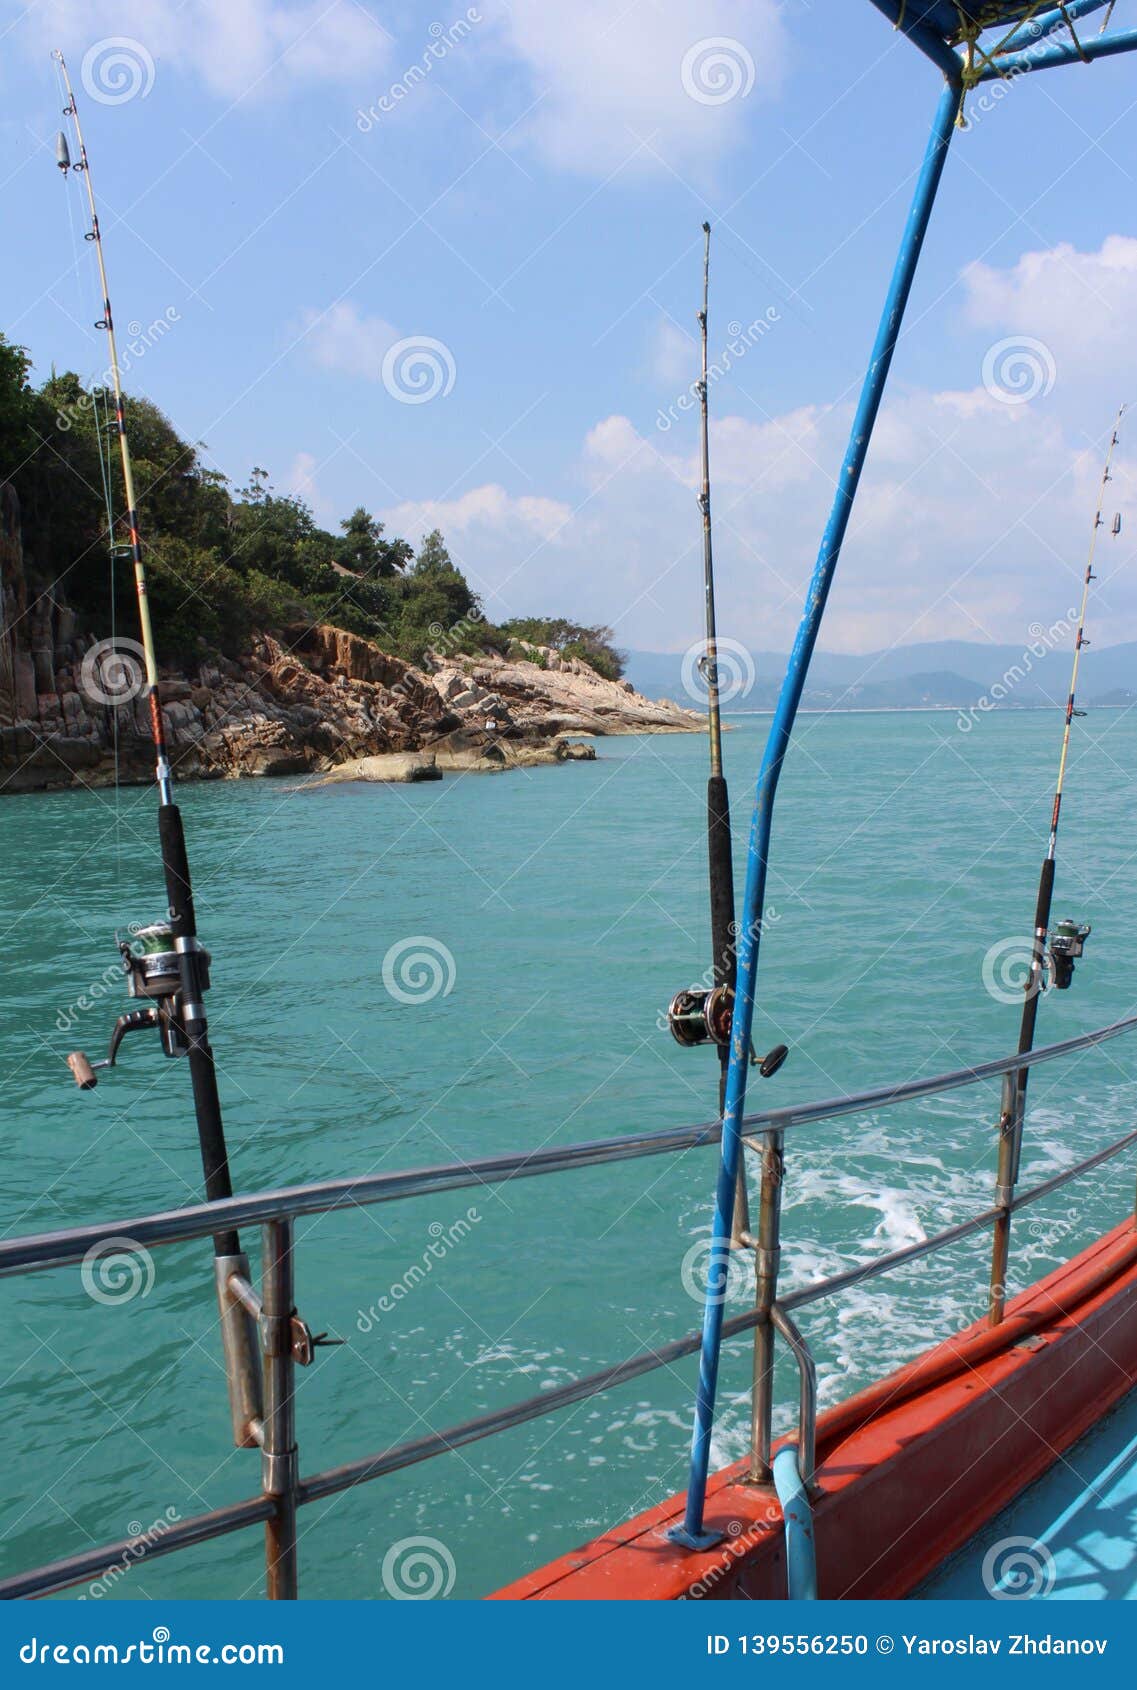 Fishing in the Pacific Ocean on a Boat with Fishing Rods Stock Photo -  Image of view, tourism: 139556250